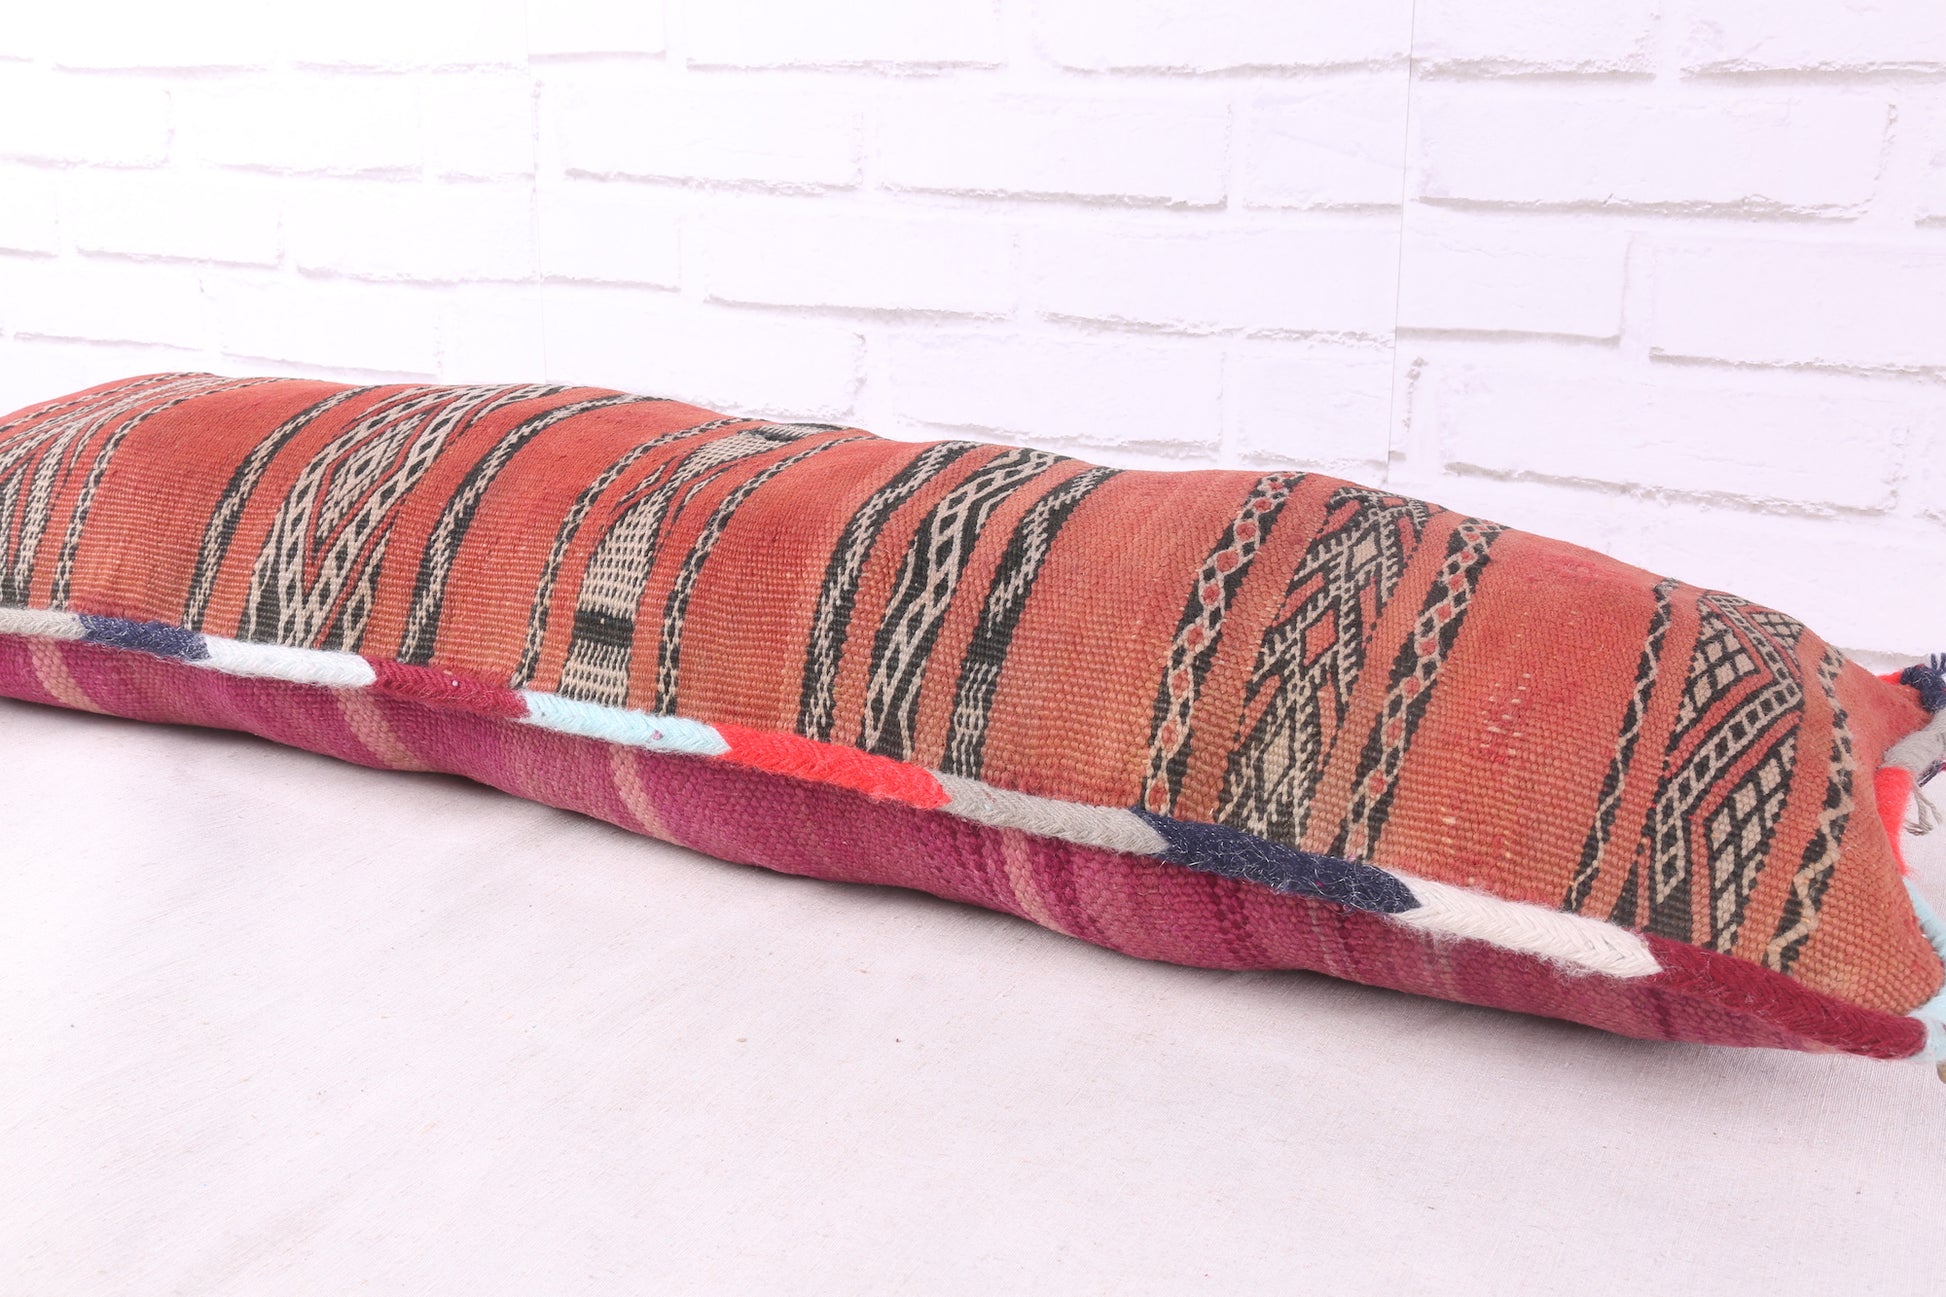 Moroccan pillow rug 2.9 inches X 37.7 inches